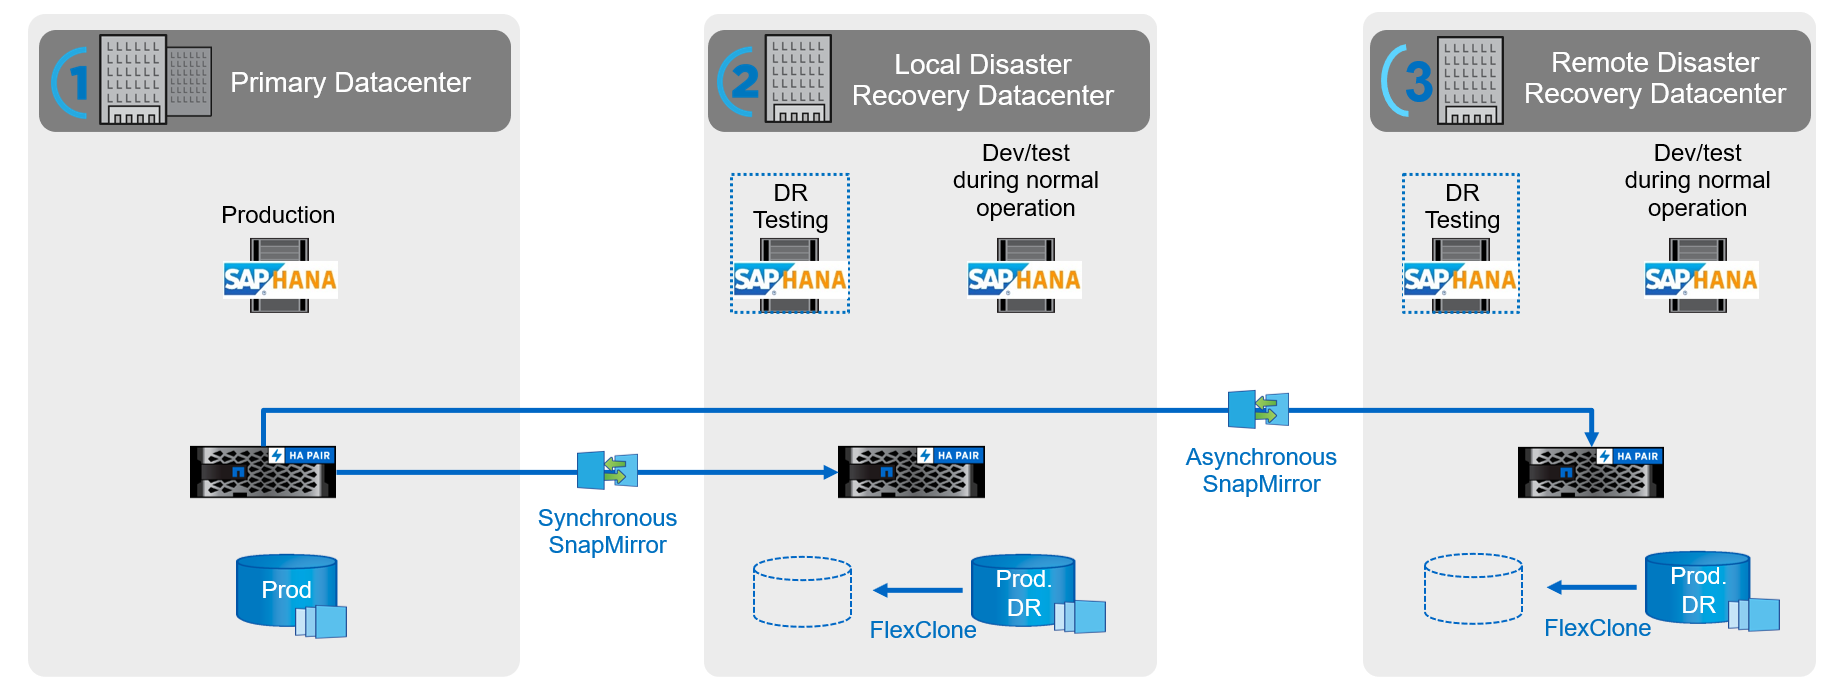 This image depicts the relationship between NetApp storage systems in the primary datacenter, the local DR datacenter, and the remote DR datacenter. They are connected by both synchronous SnapMirror and asynchronous SnapMirror relationships.